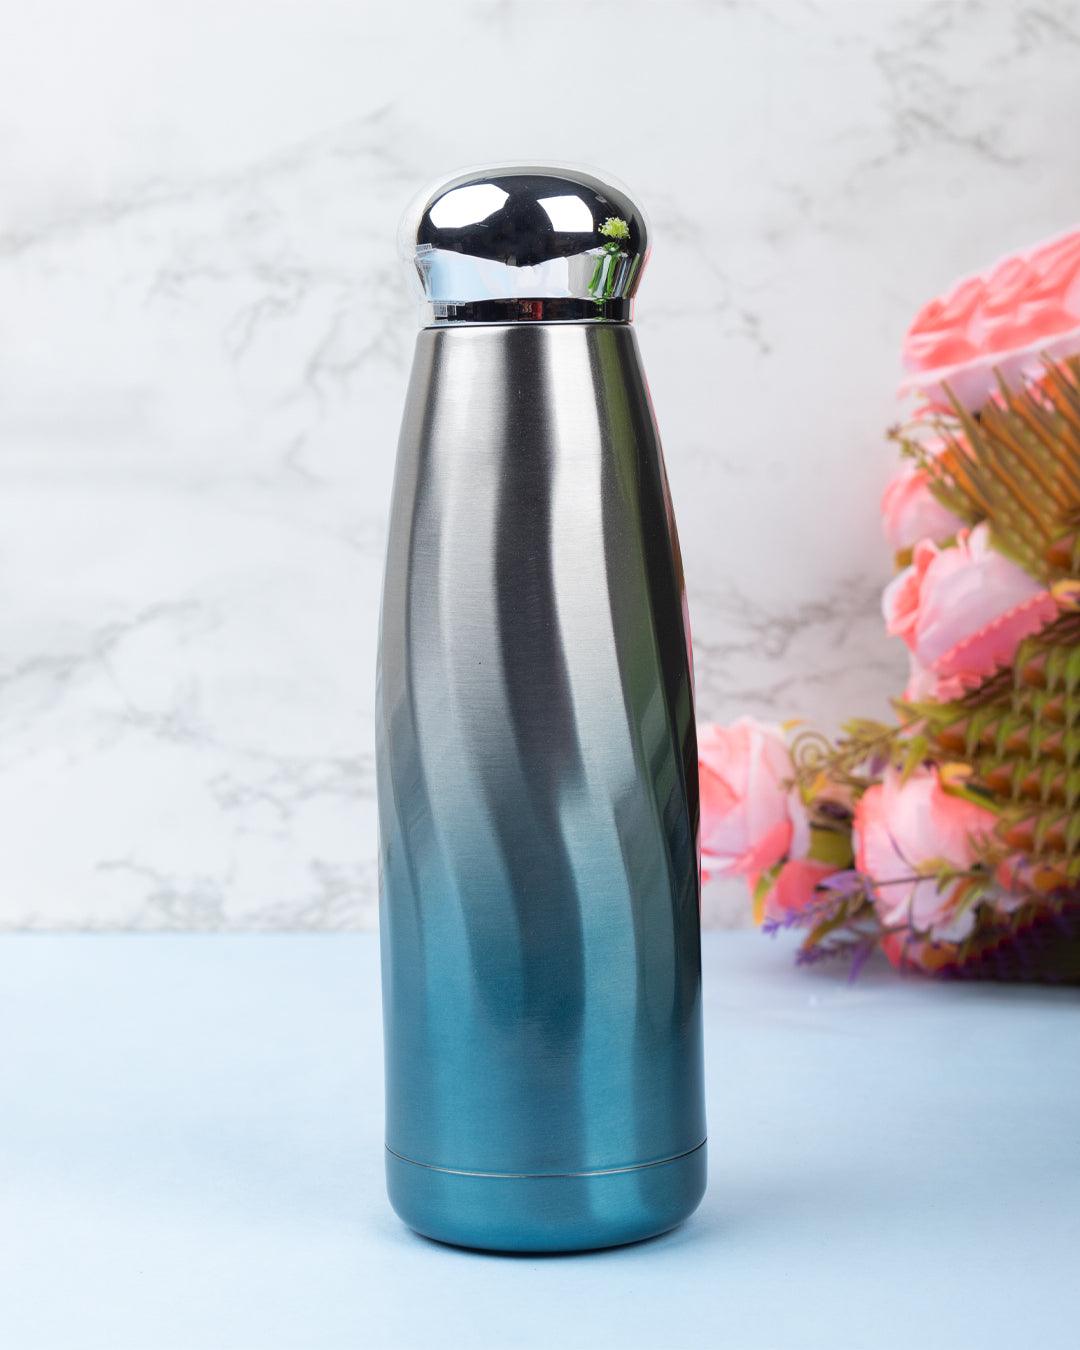 Dual Shade Water Bottle, Temperature Retention, Blue, Stainless Steel, 350ML - MARKET 99